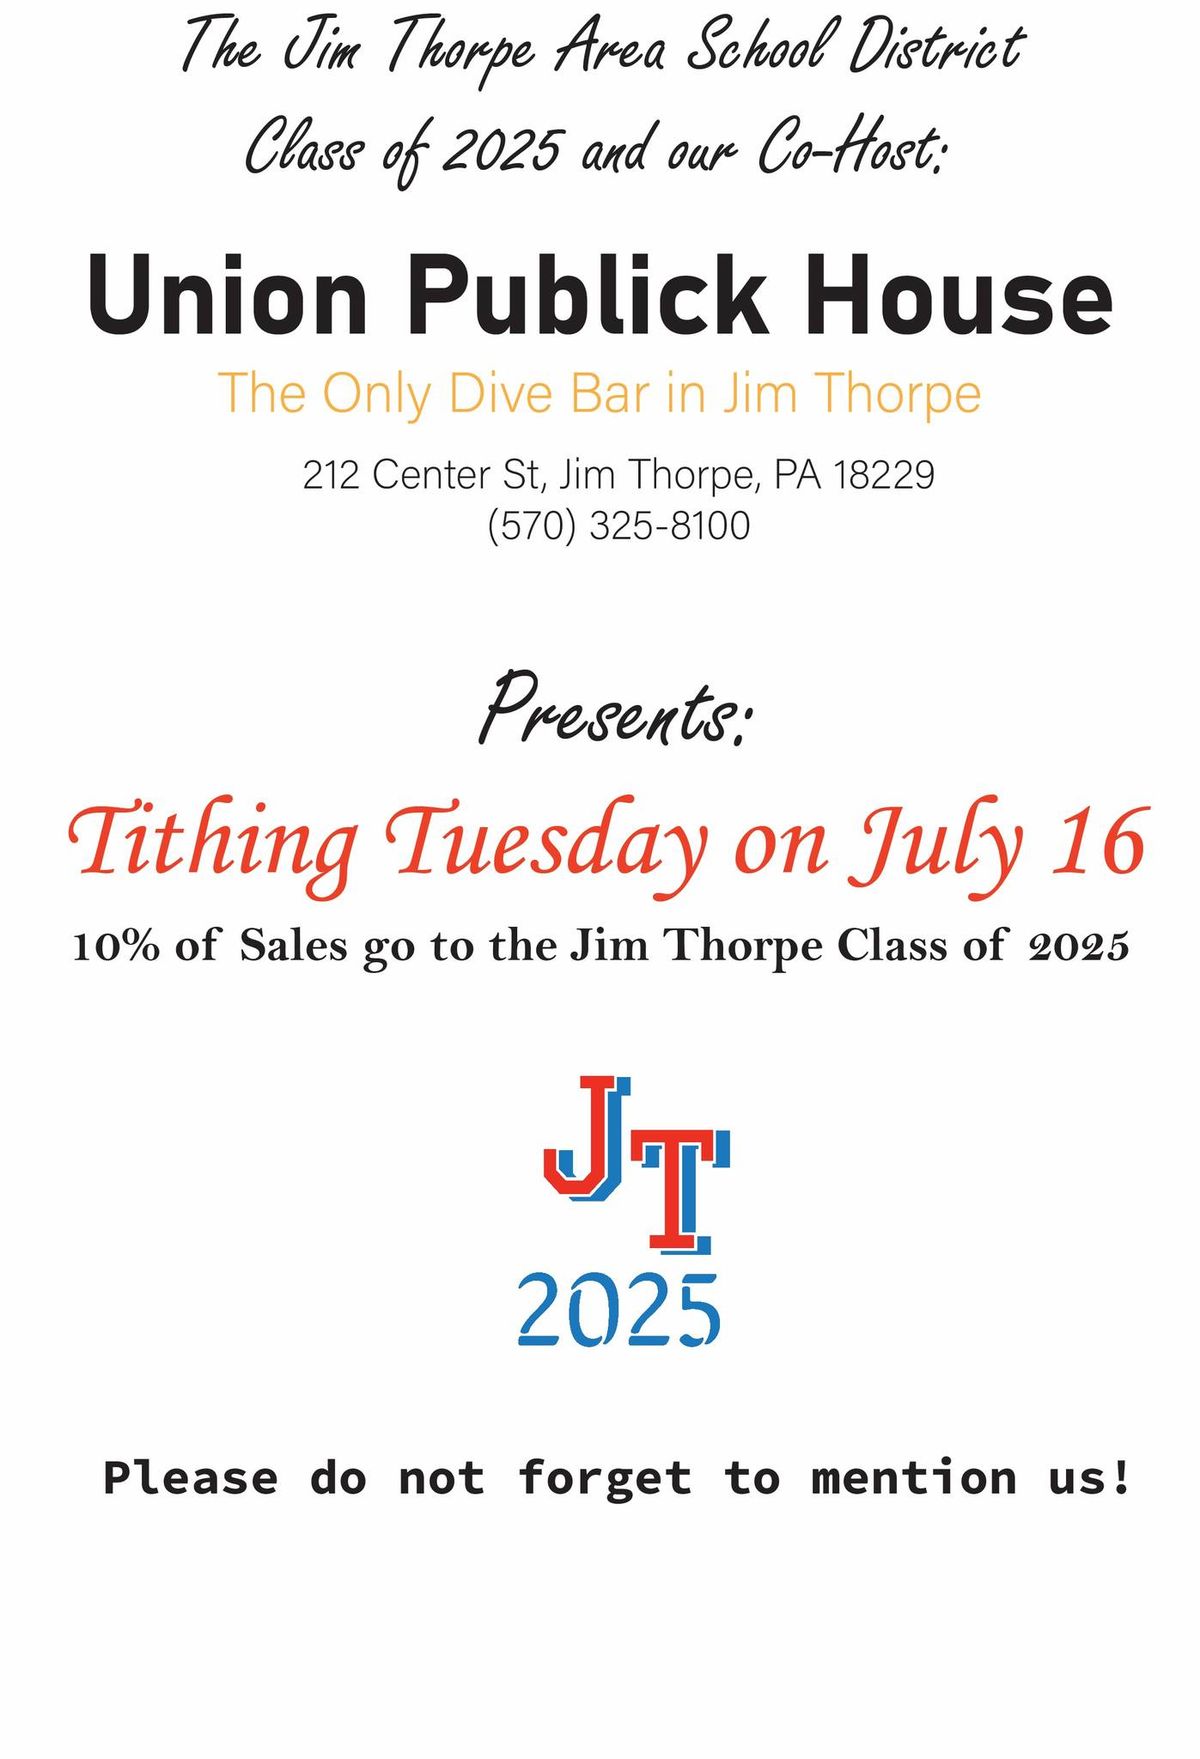 Tithing Tuesday July 16 @UPH